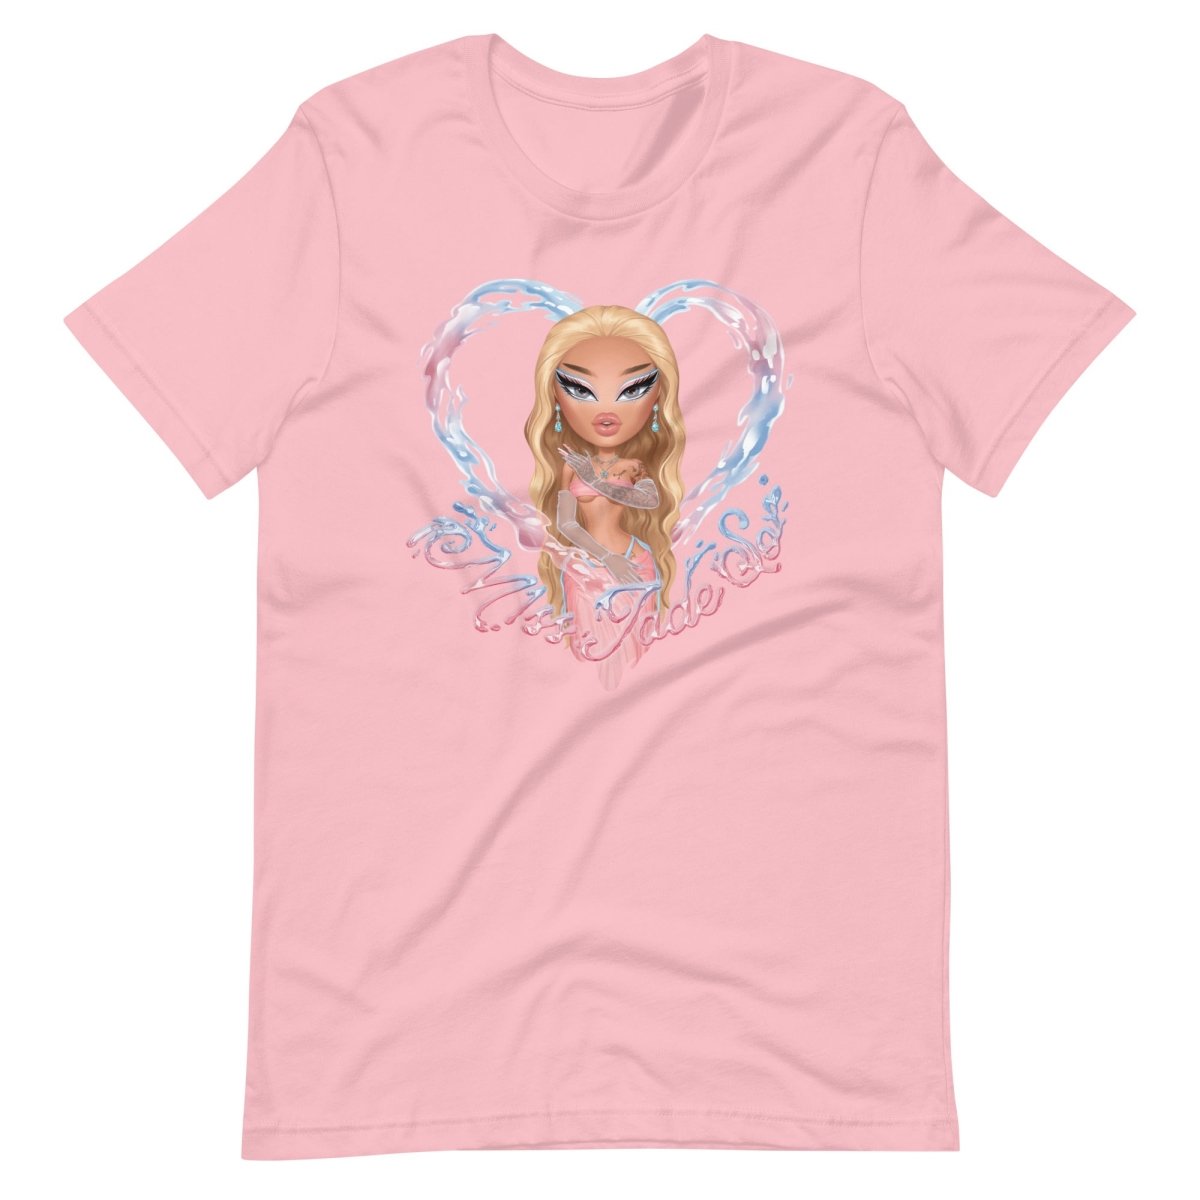 M!SS JADE SO - enTRANS T-Shirt - dragqueenmerch